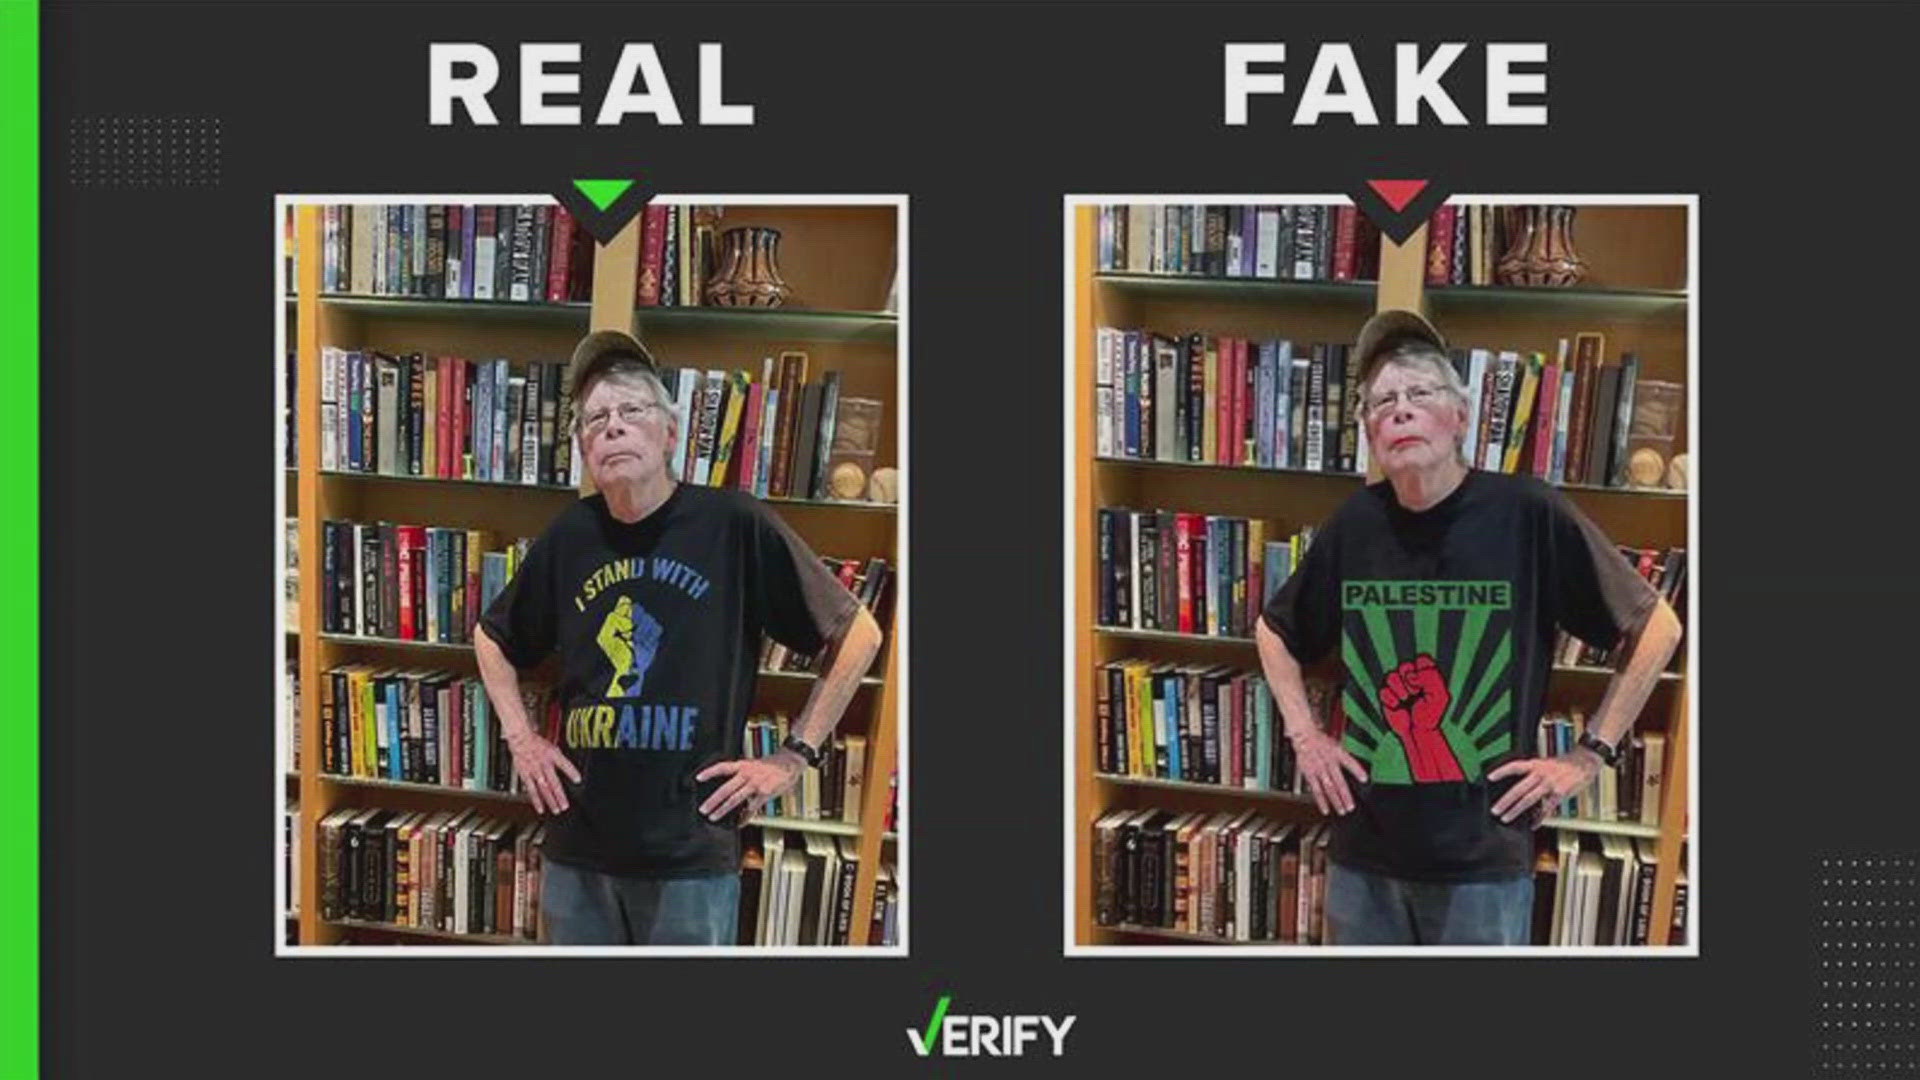 The viral image was photoshopped to show the author wearing makeup and a Palestine shirt. The original image was taken in 2022.